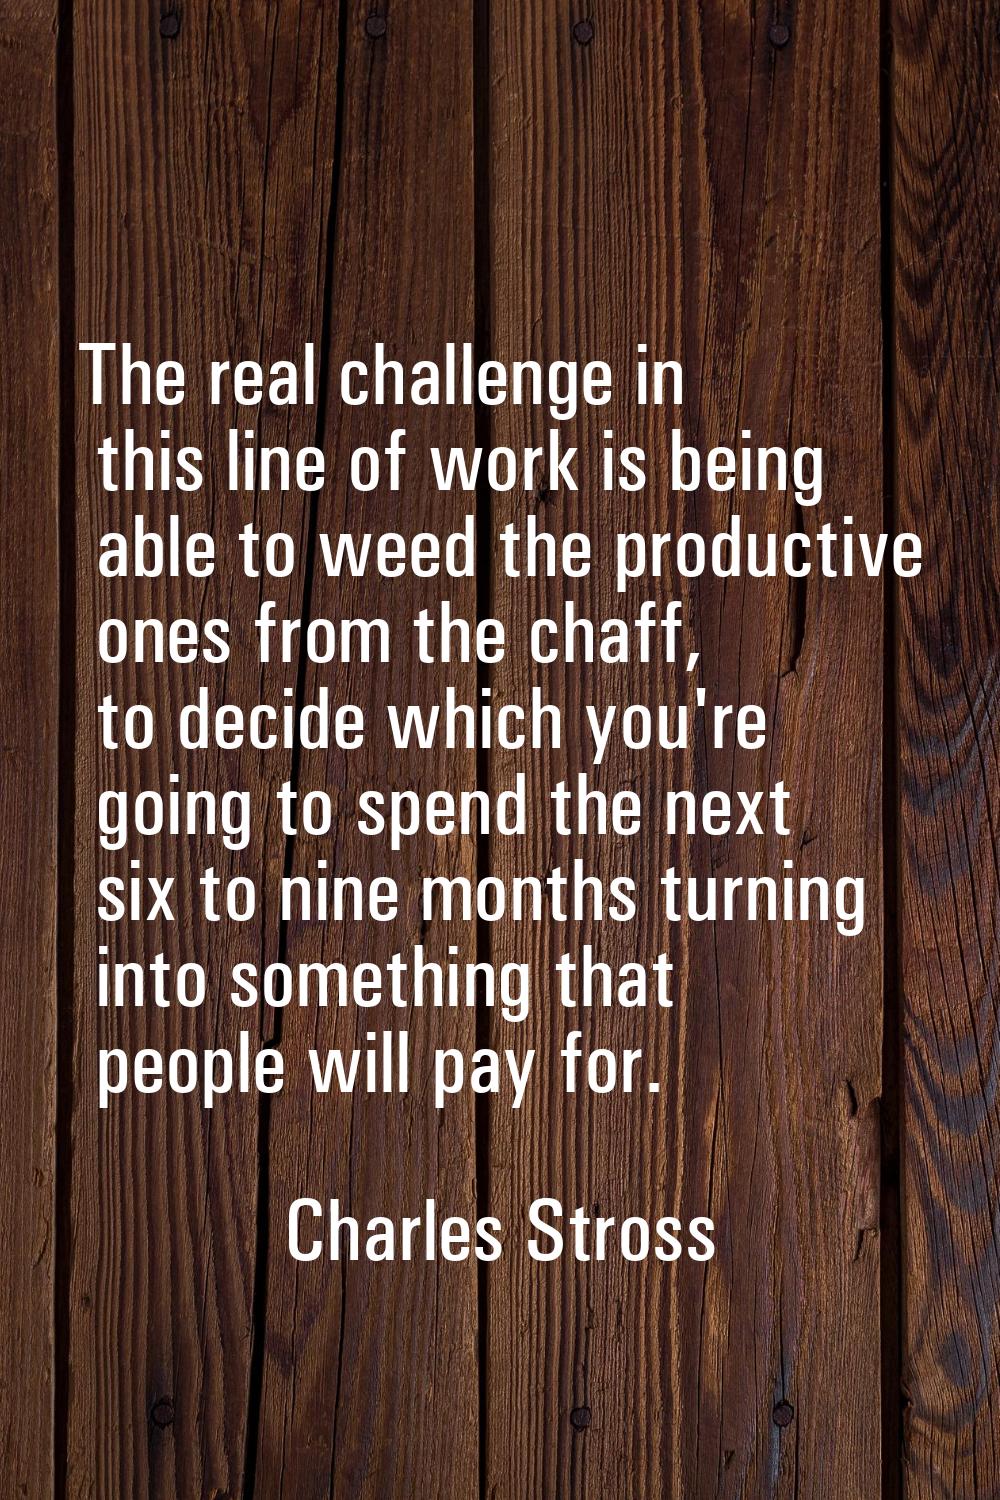 The real challenge in this line of work is being able to weed the productive ones from the chaff, t